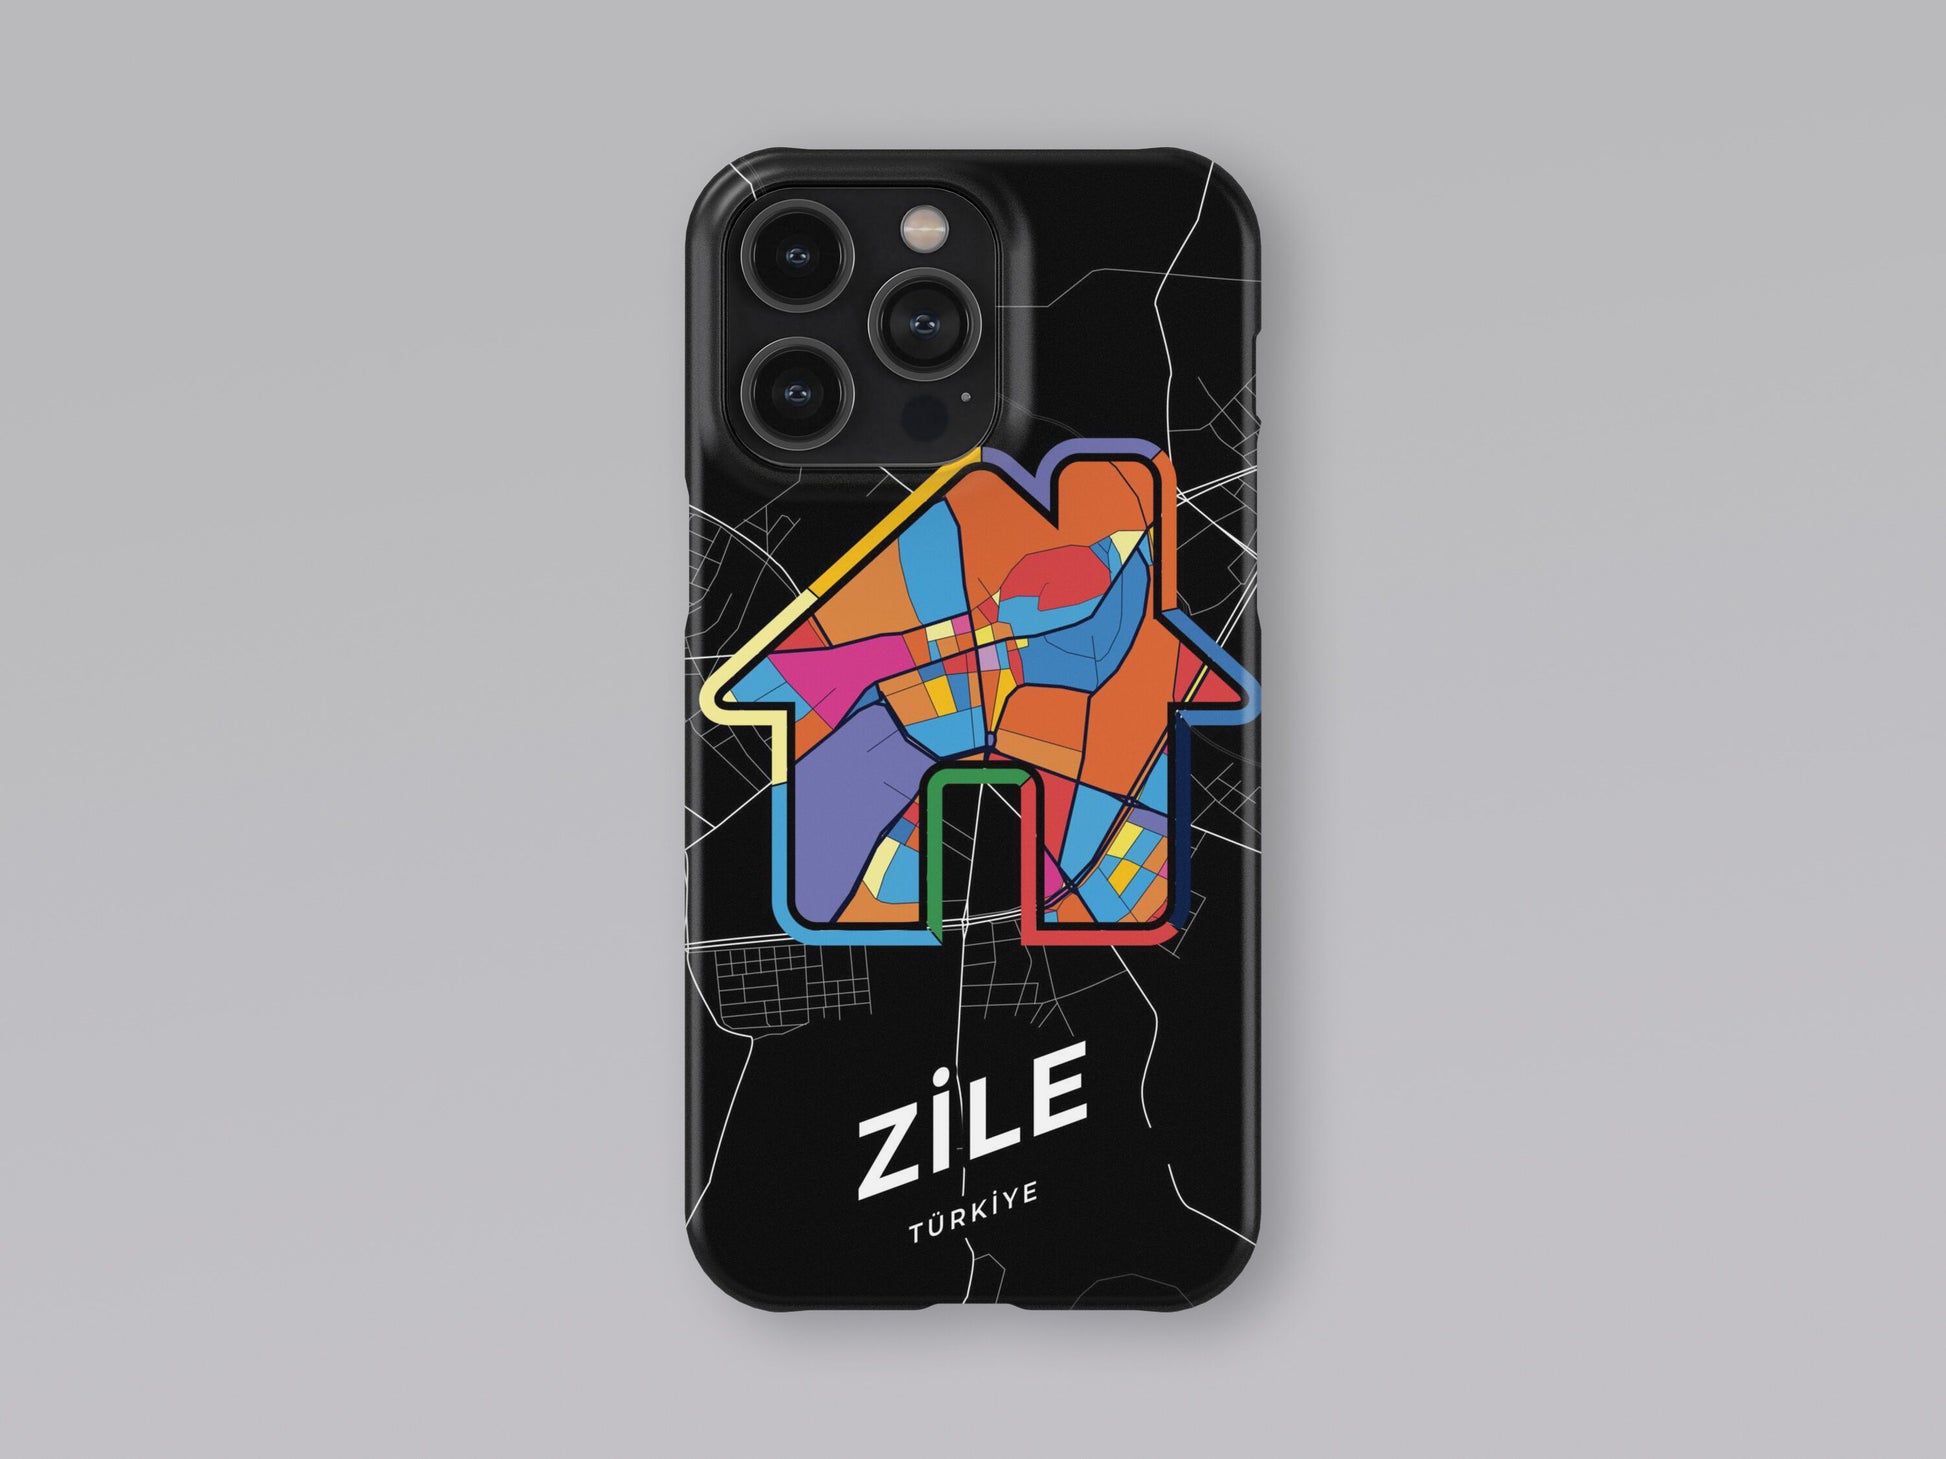 Zile Turkey slim phone case with colorful icon 3